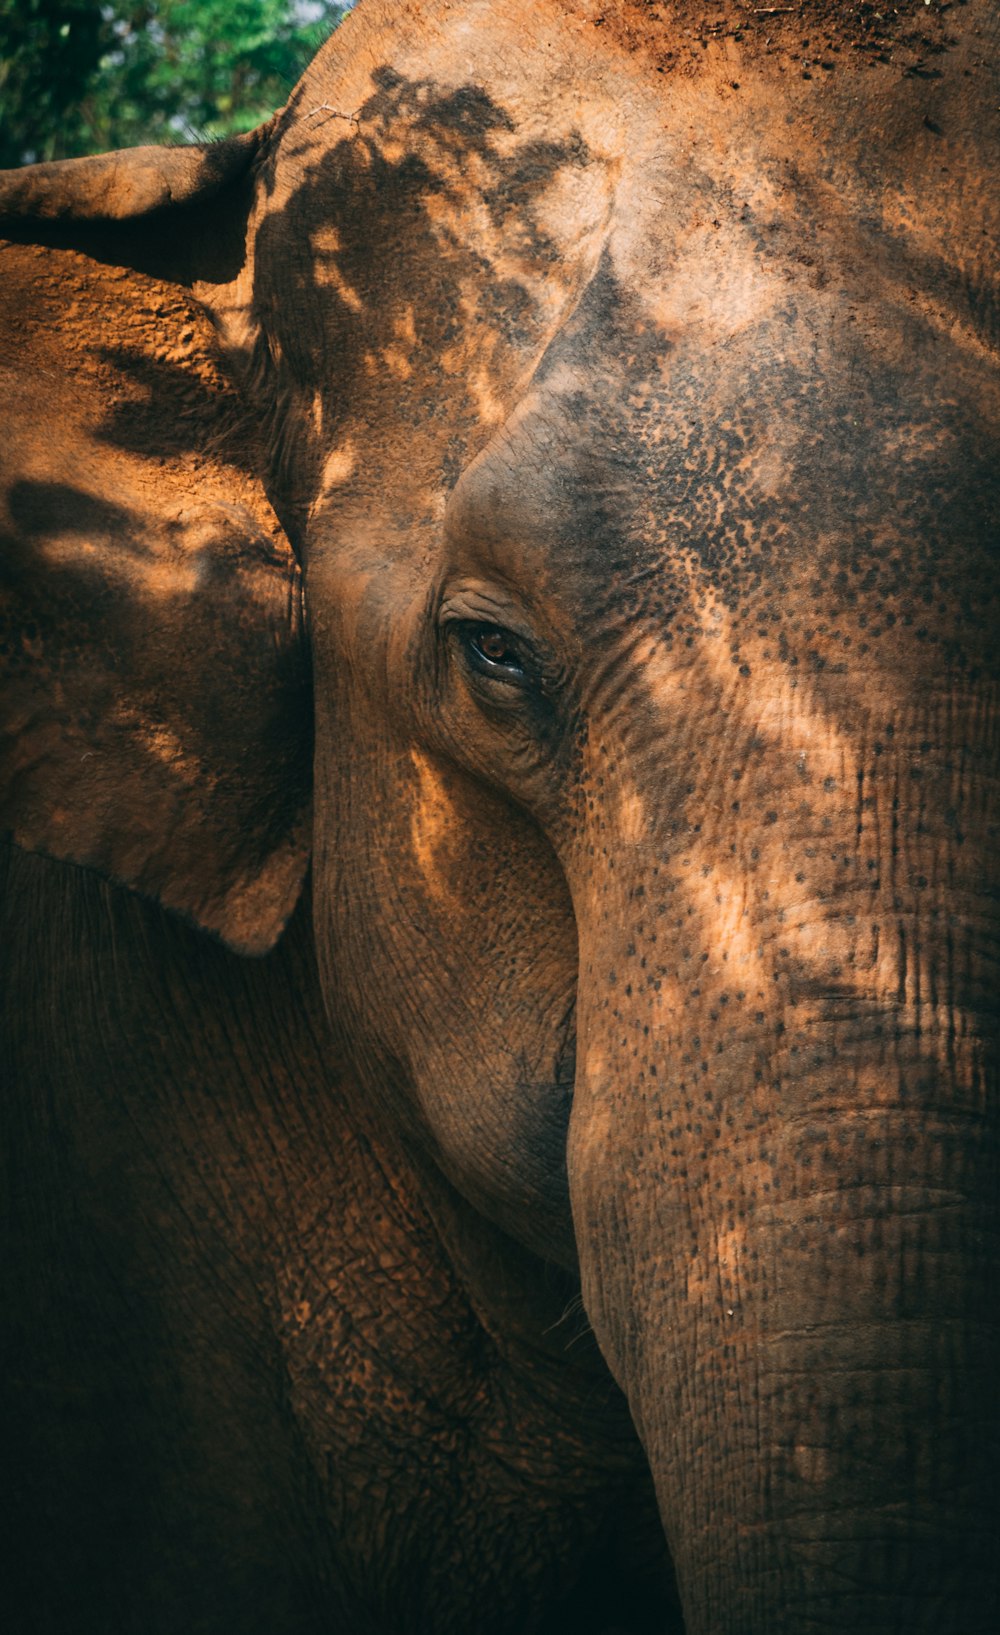 an elephant with its trunk up